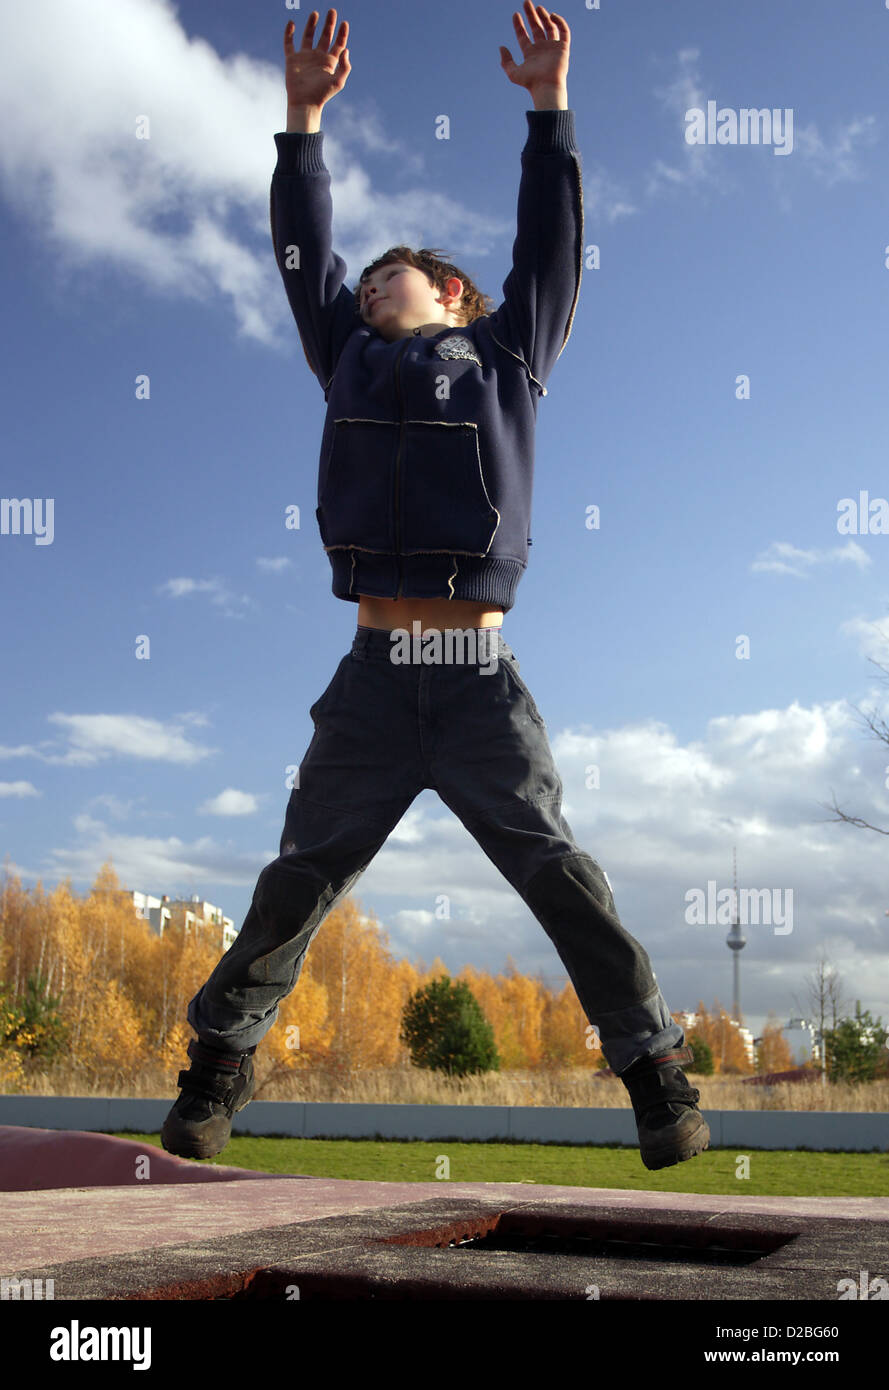 Berlin, Germany, dreamy boy jumping in the air Stock Photo